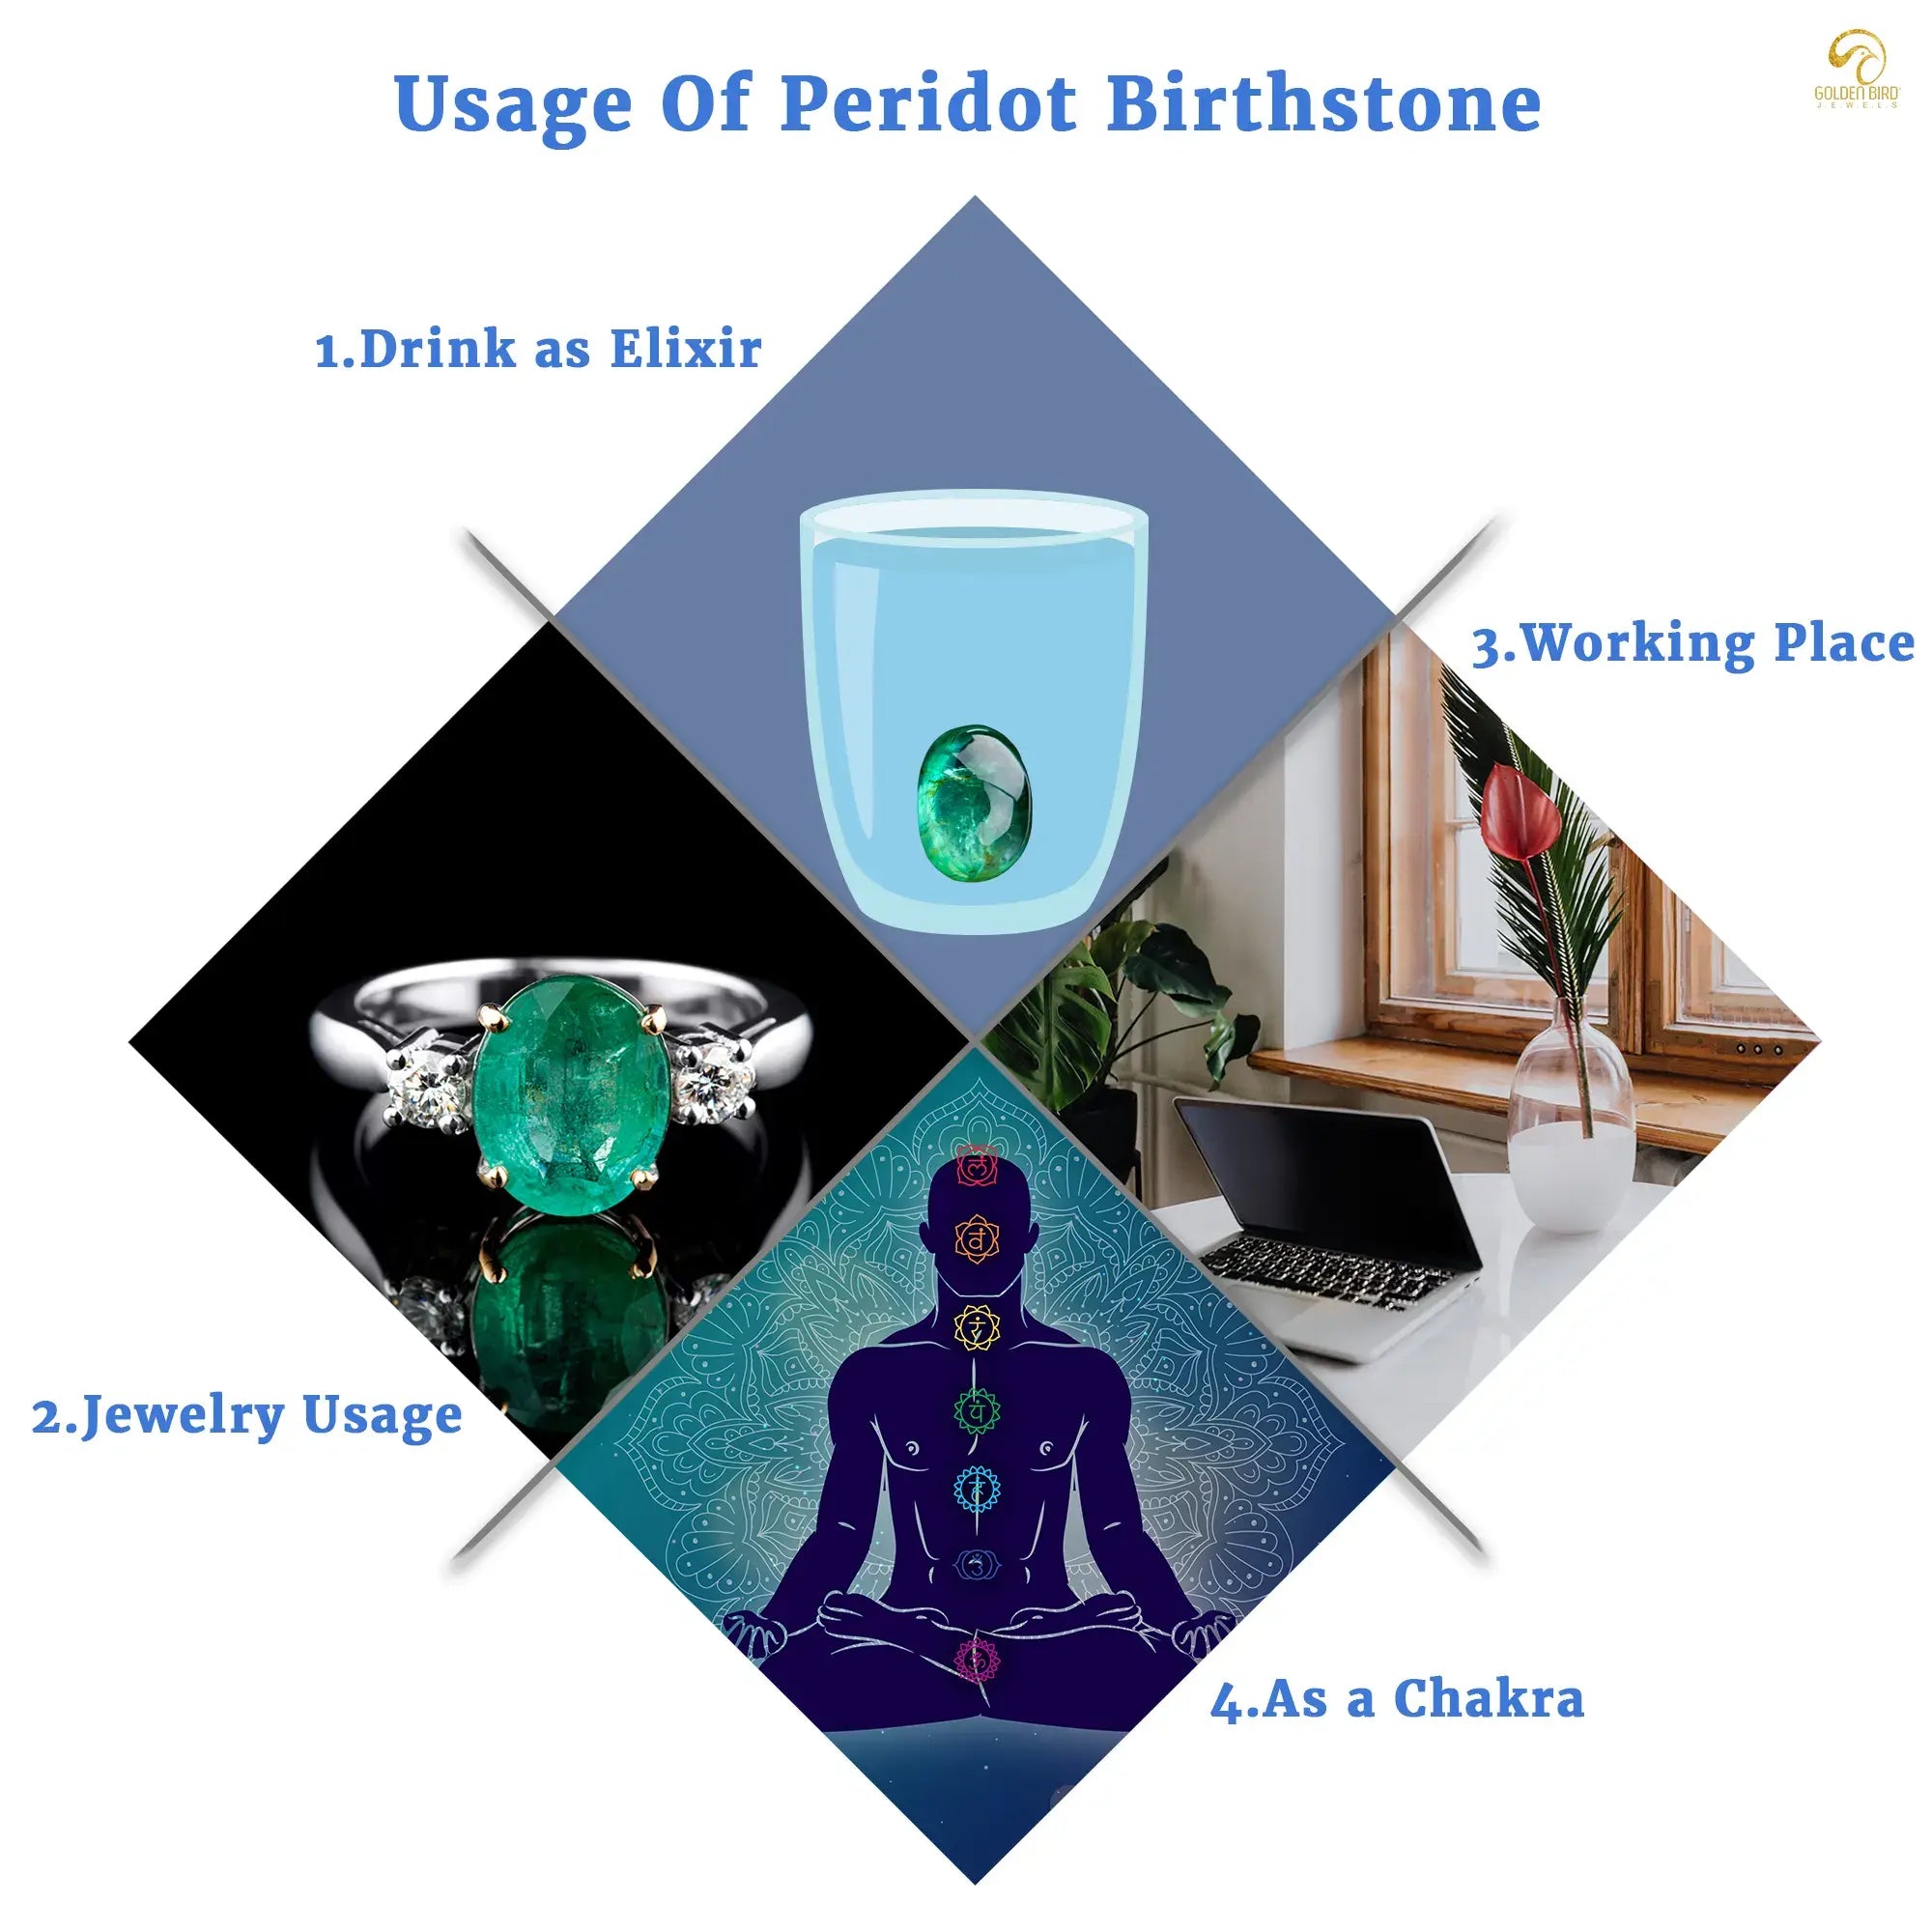 Perdiot gemstone usage to bring new intentions and powers in the life